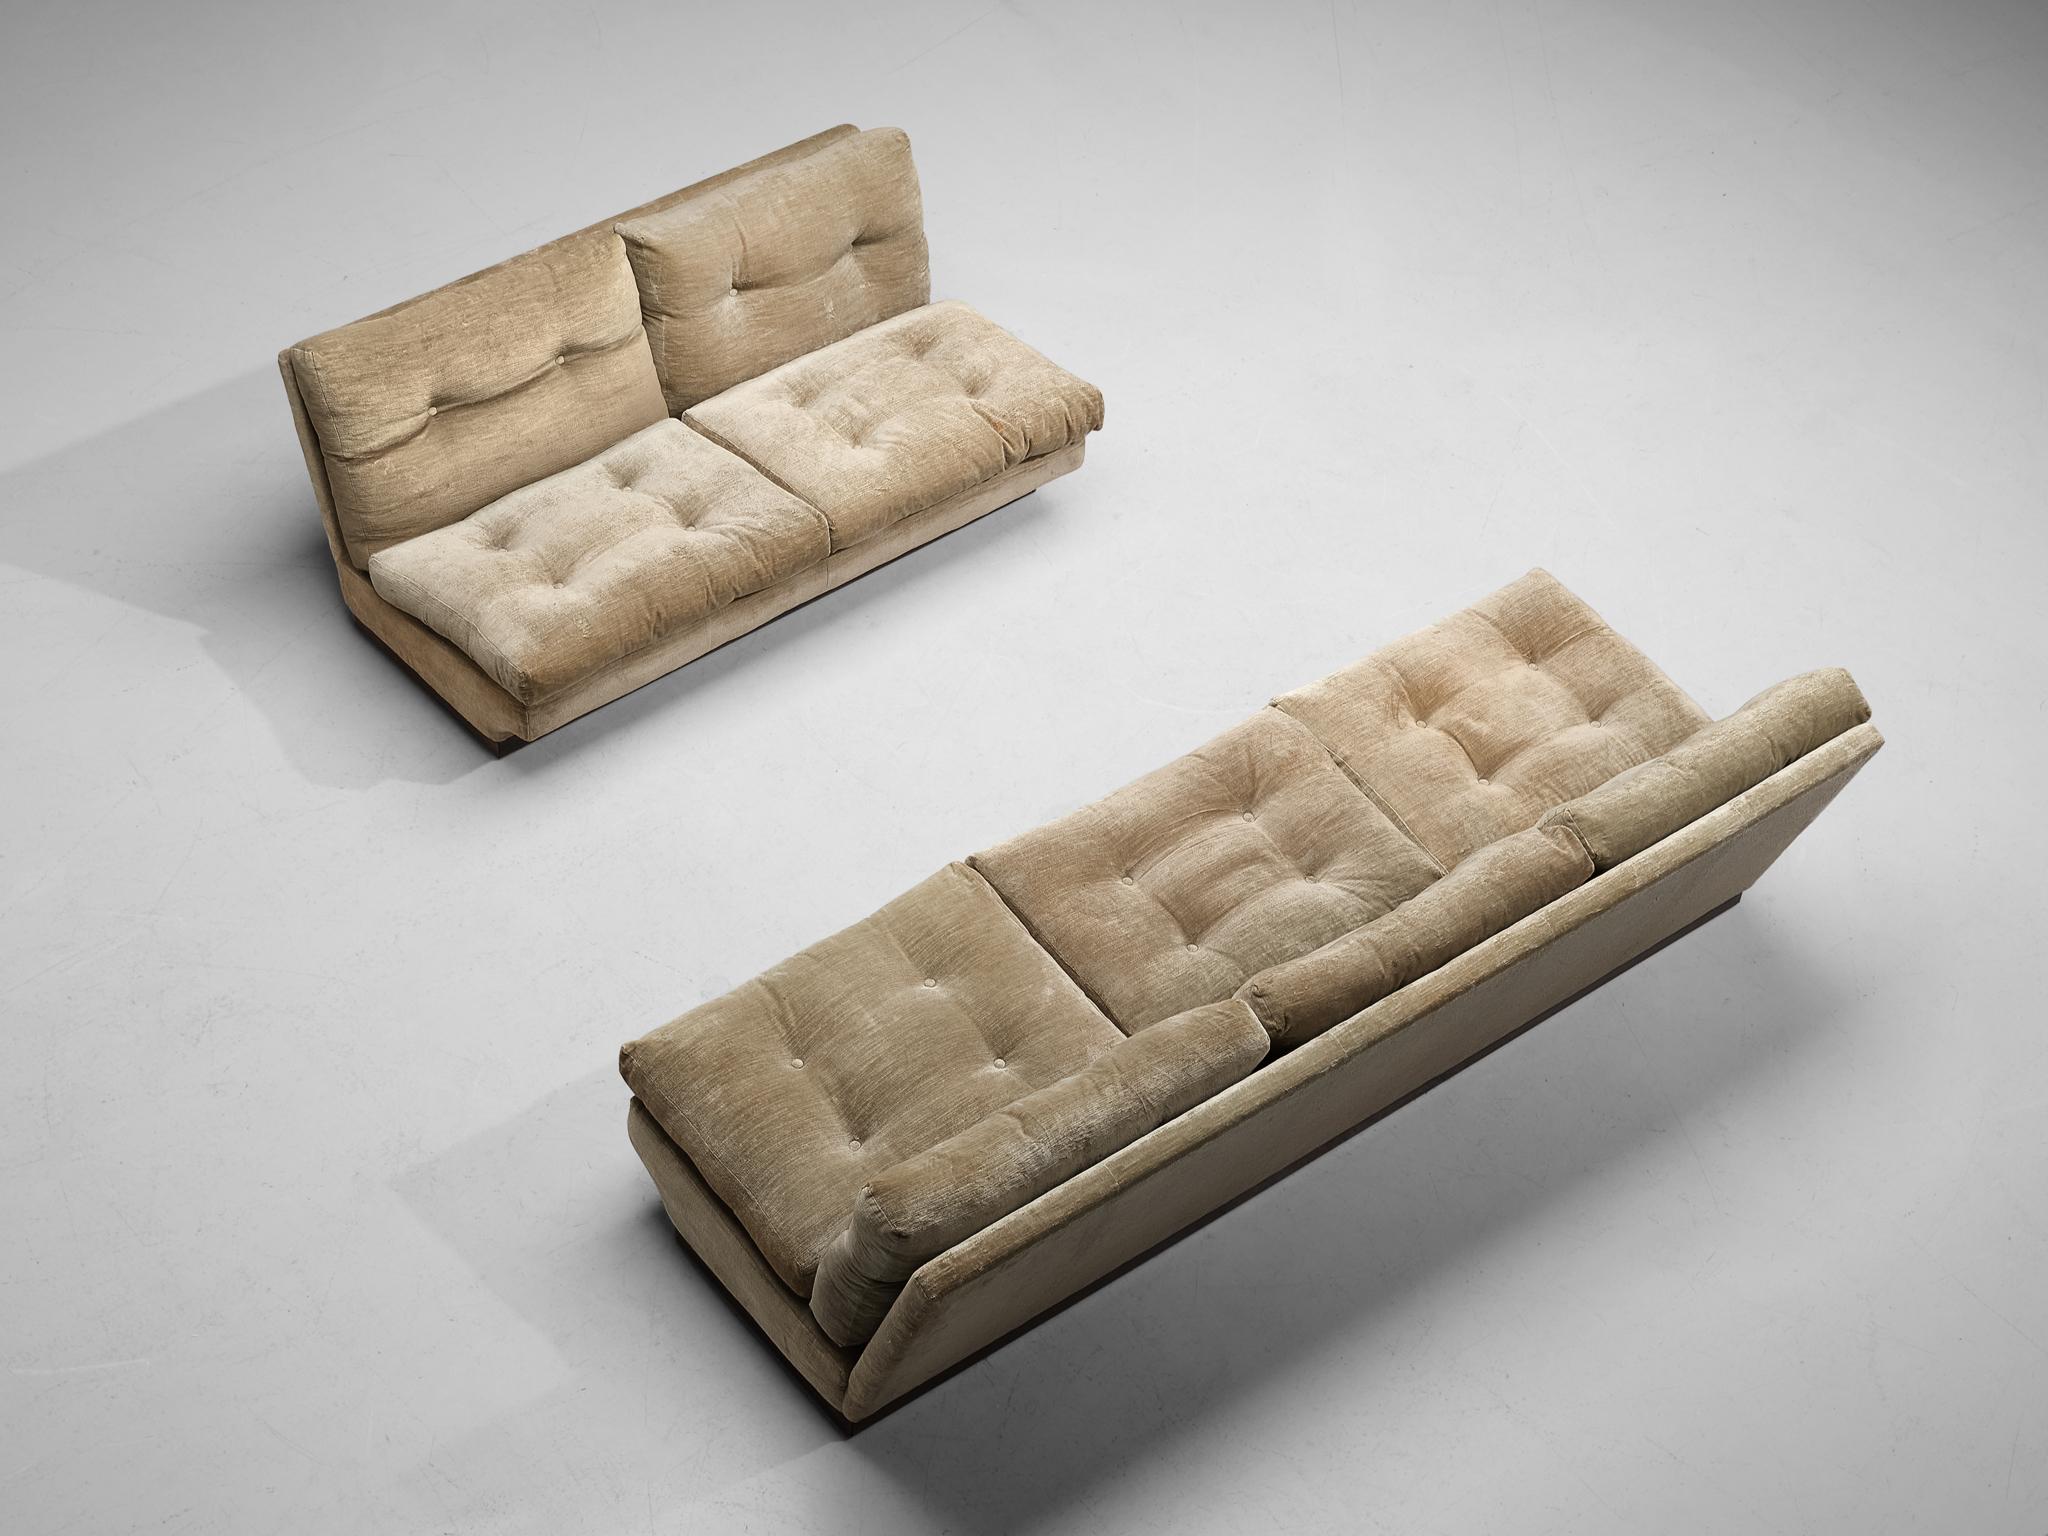 Alpi, set of three and two-seater sofa, velvet, lacquered wood, Italy, 1966

These delicate sofas truly intensify the experience of sitting itself and is a standout in one's modern room. These models are well-designed featuring clear lines and